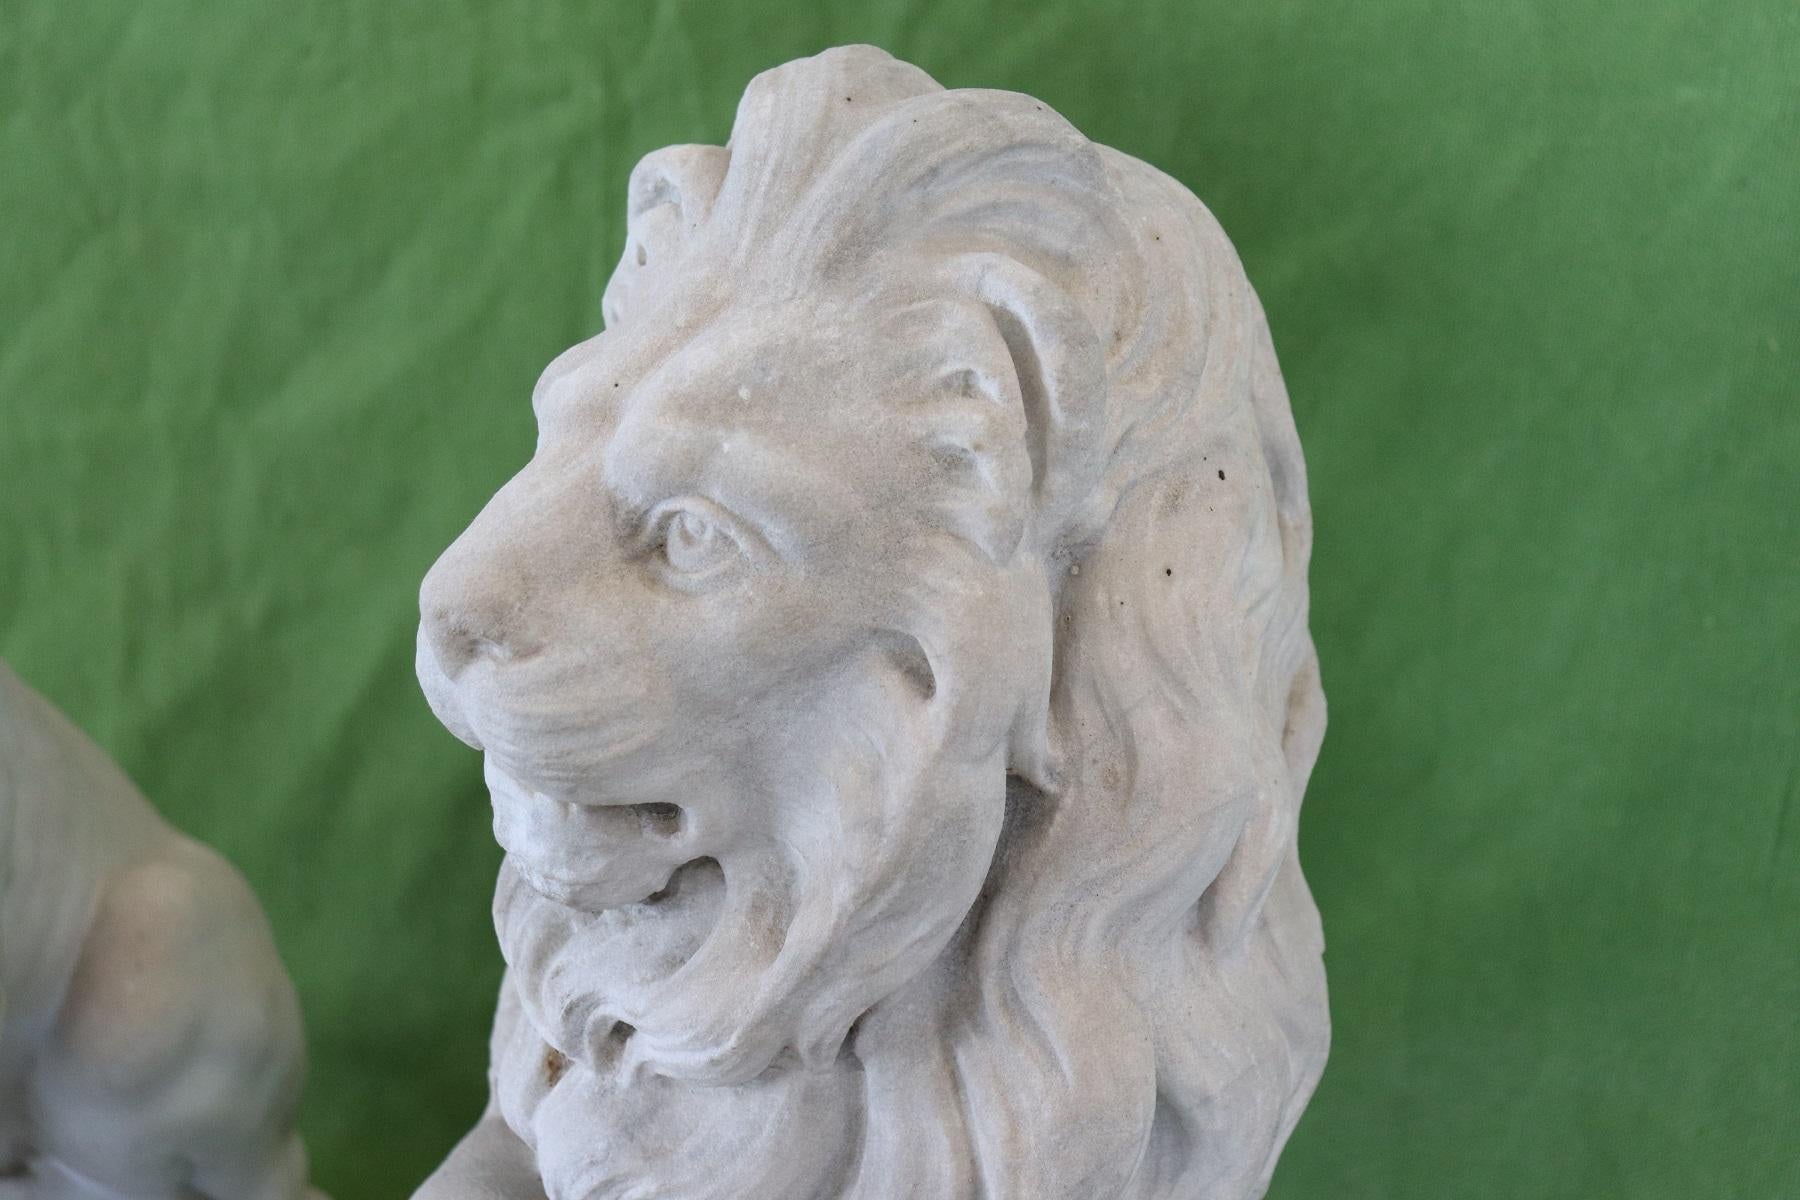 Late 19th Century 19th Century Italian Sculpture in White Marble of Carrara Pair of Lions